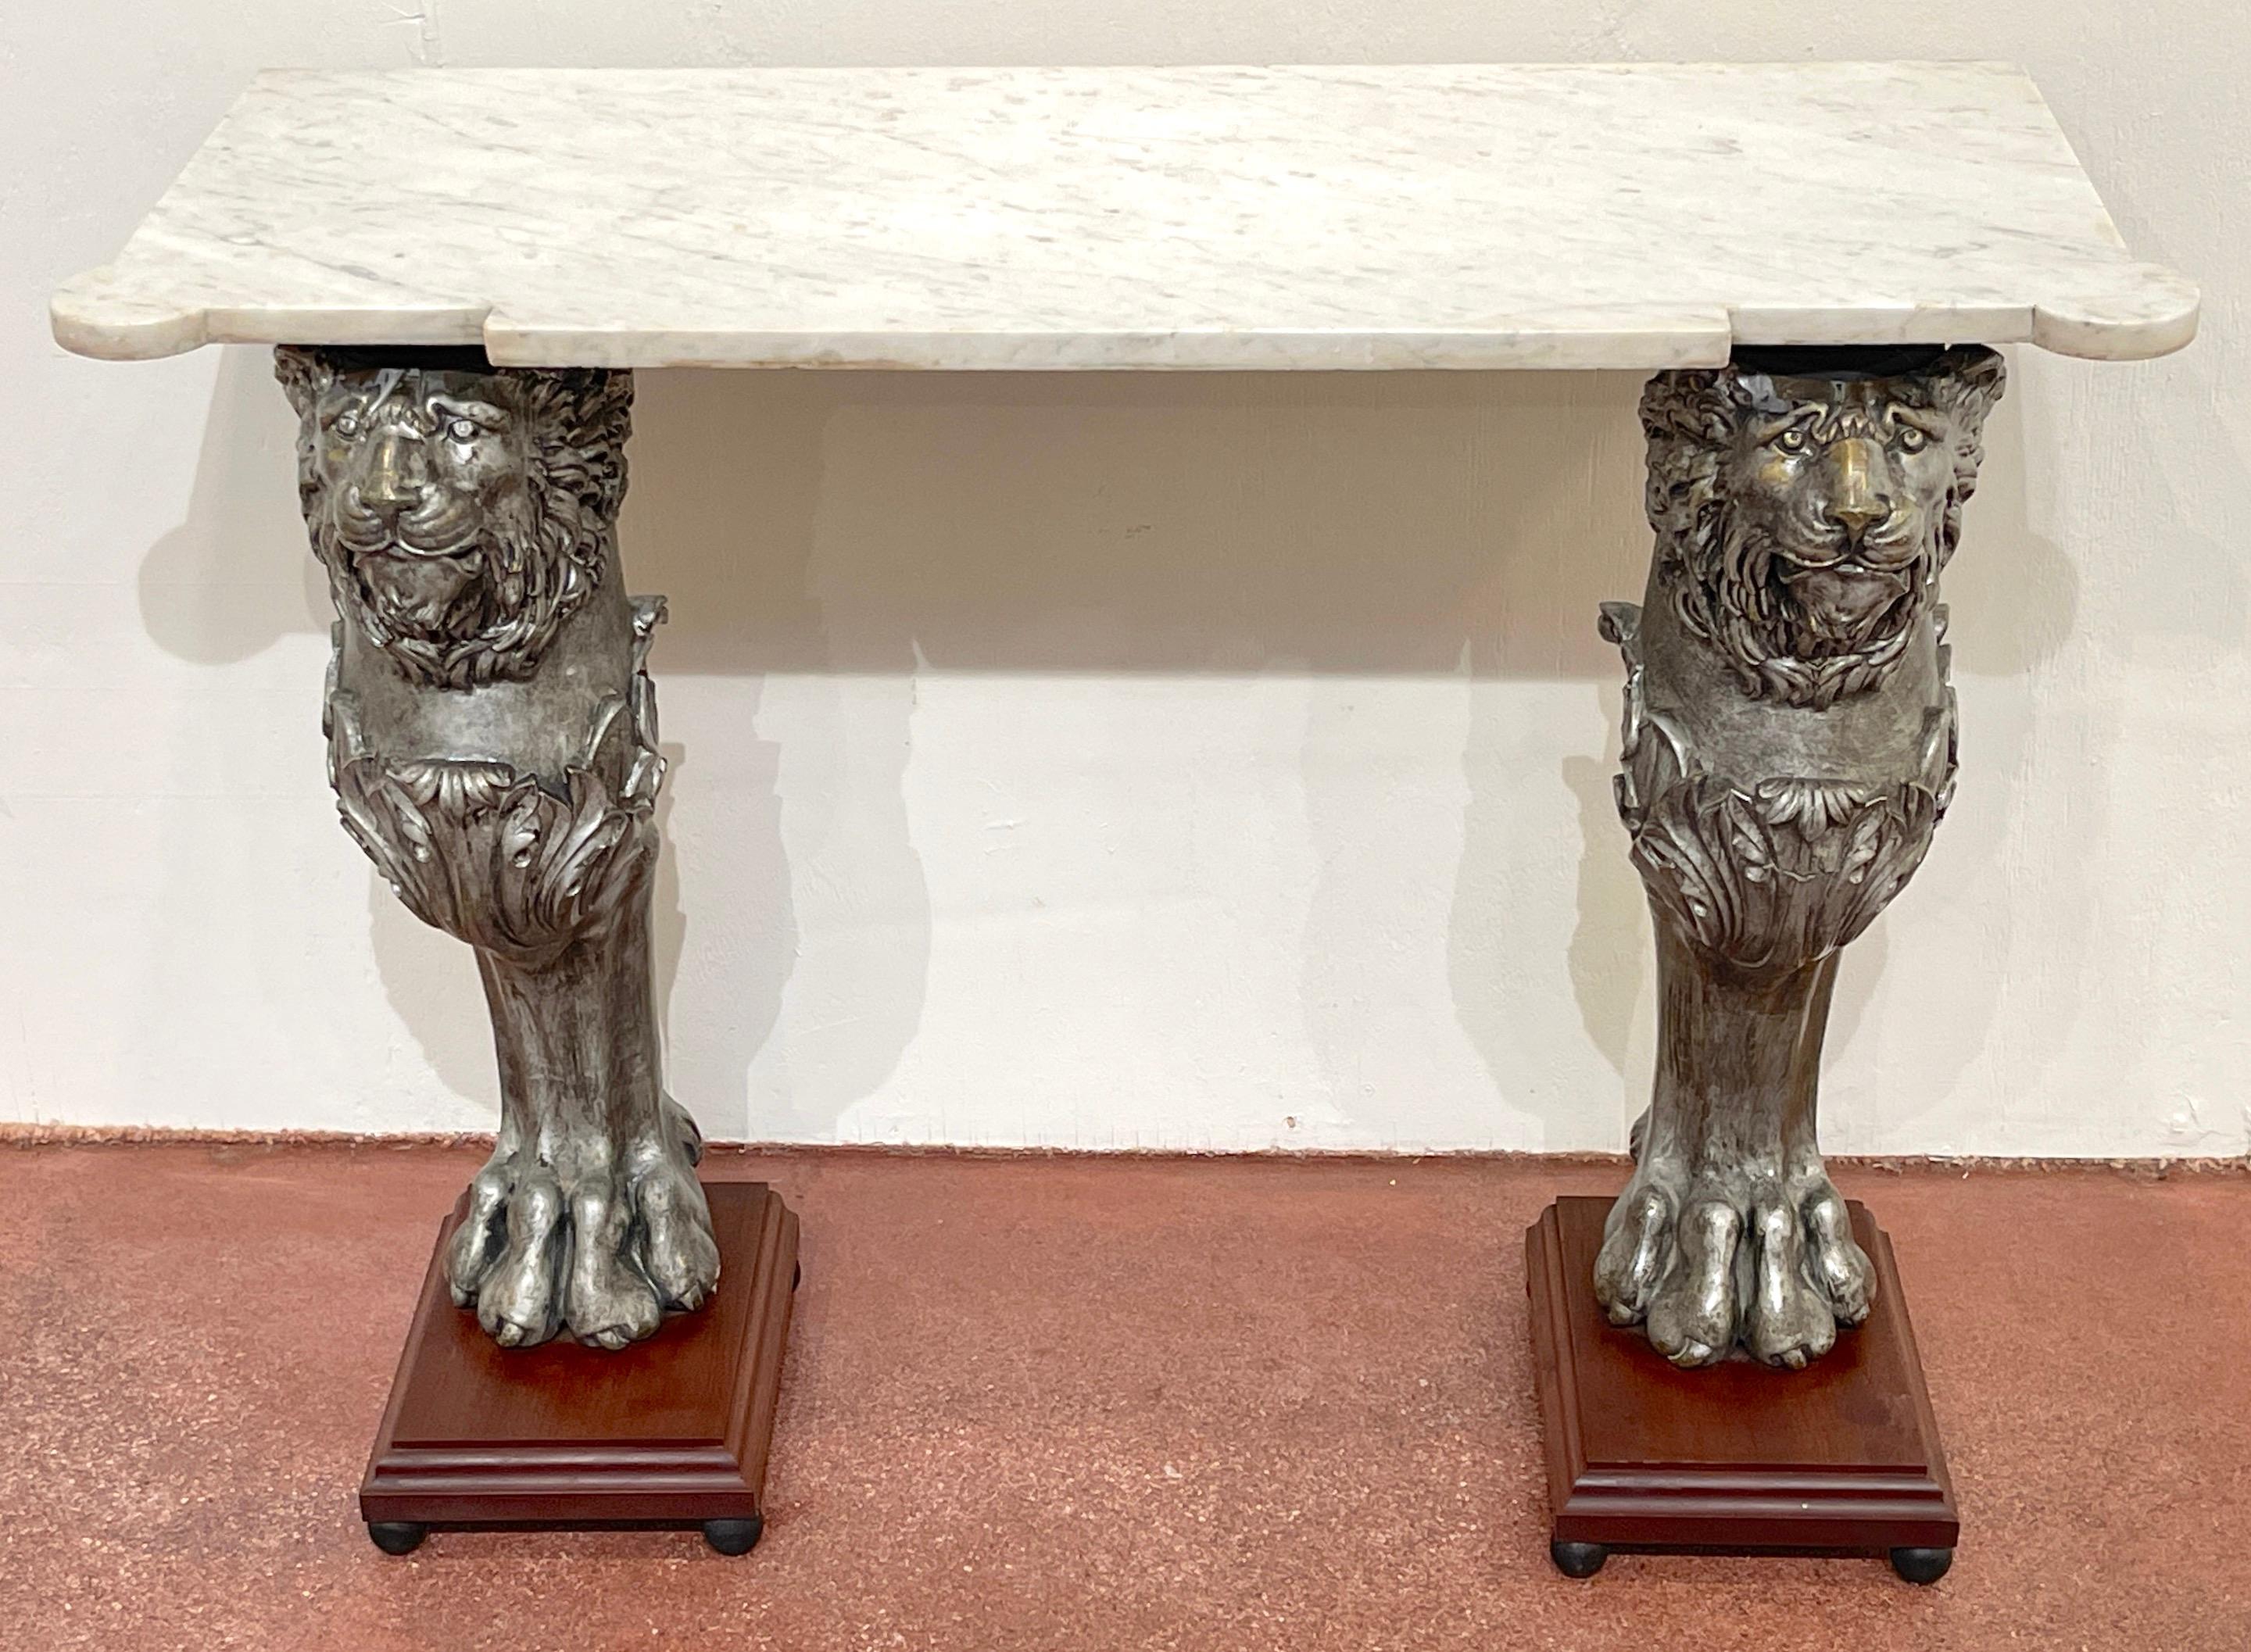 English Regency Style Marble Top Zinc Lion Caryatid Console Table 
England, circa 1900s

With canted cornered white marble top, raised on a pair of finely cast staunch silvered metal/zinc lion caryatids, resting on square mahogany pedestal bases